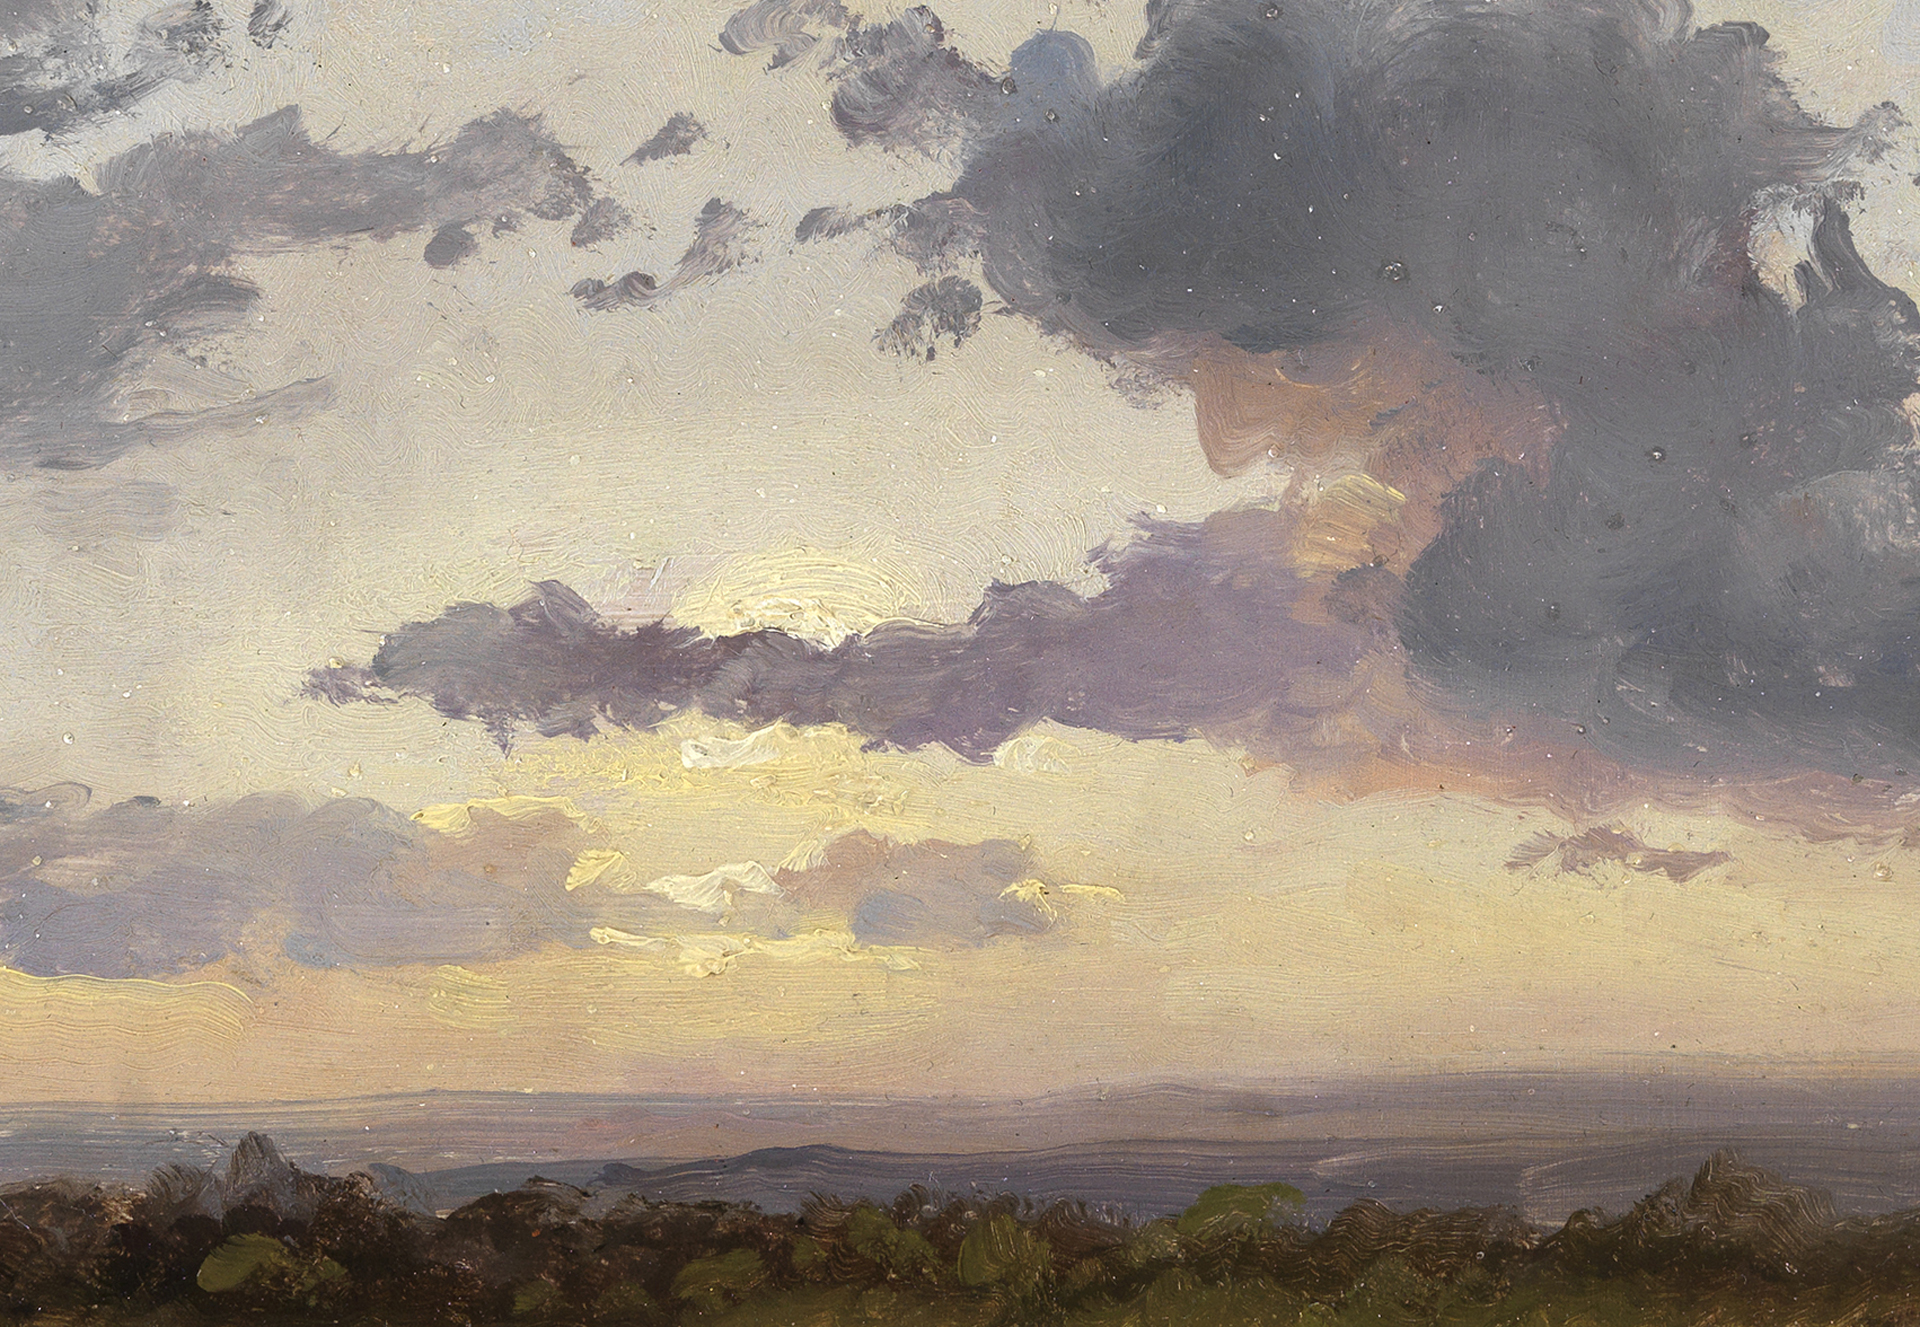 Oil study by Johan Christian Clausen Dahl, sky with sun behind clouds over landscape.